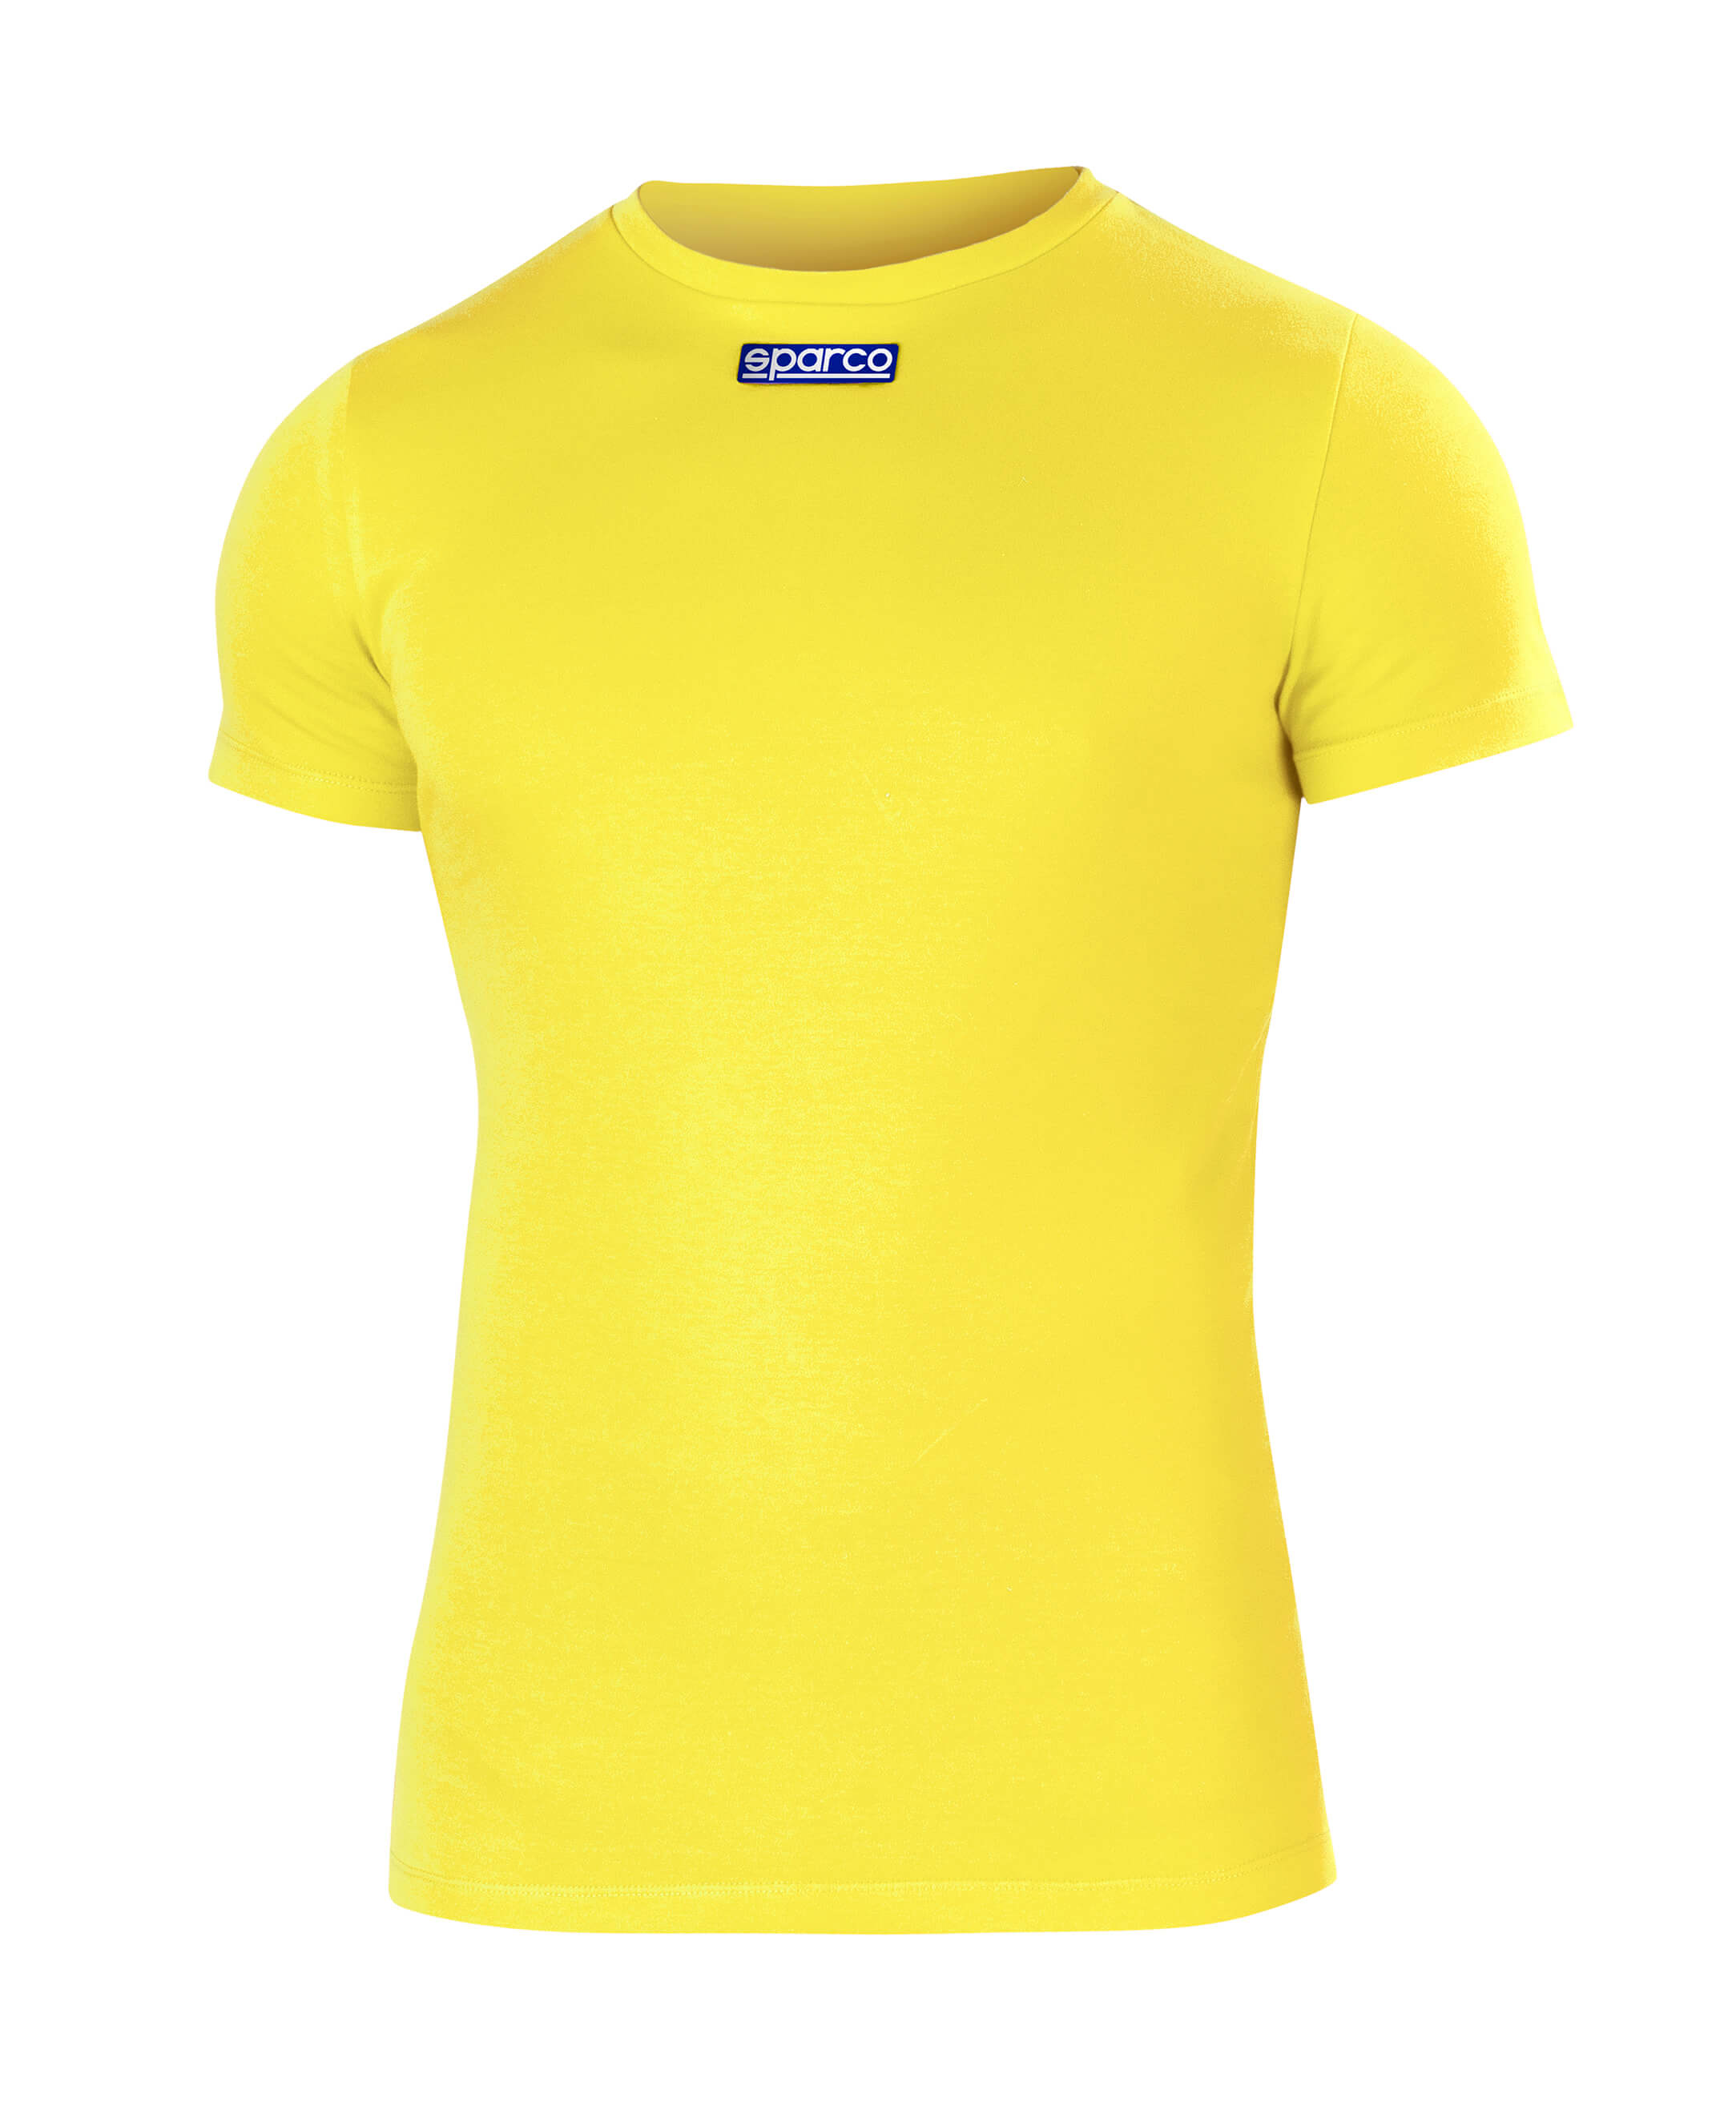 SPARCO 002204GF1S B-ROOKIE Karting T shirt, cotton, yellow, size S Photo-0 